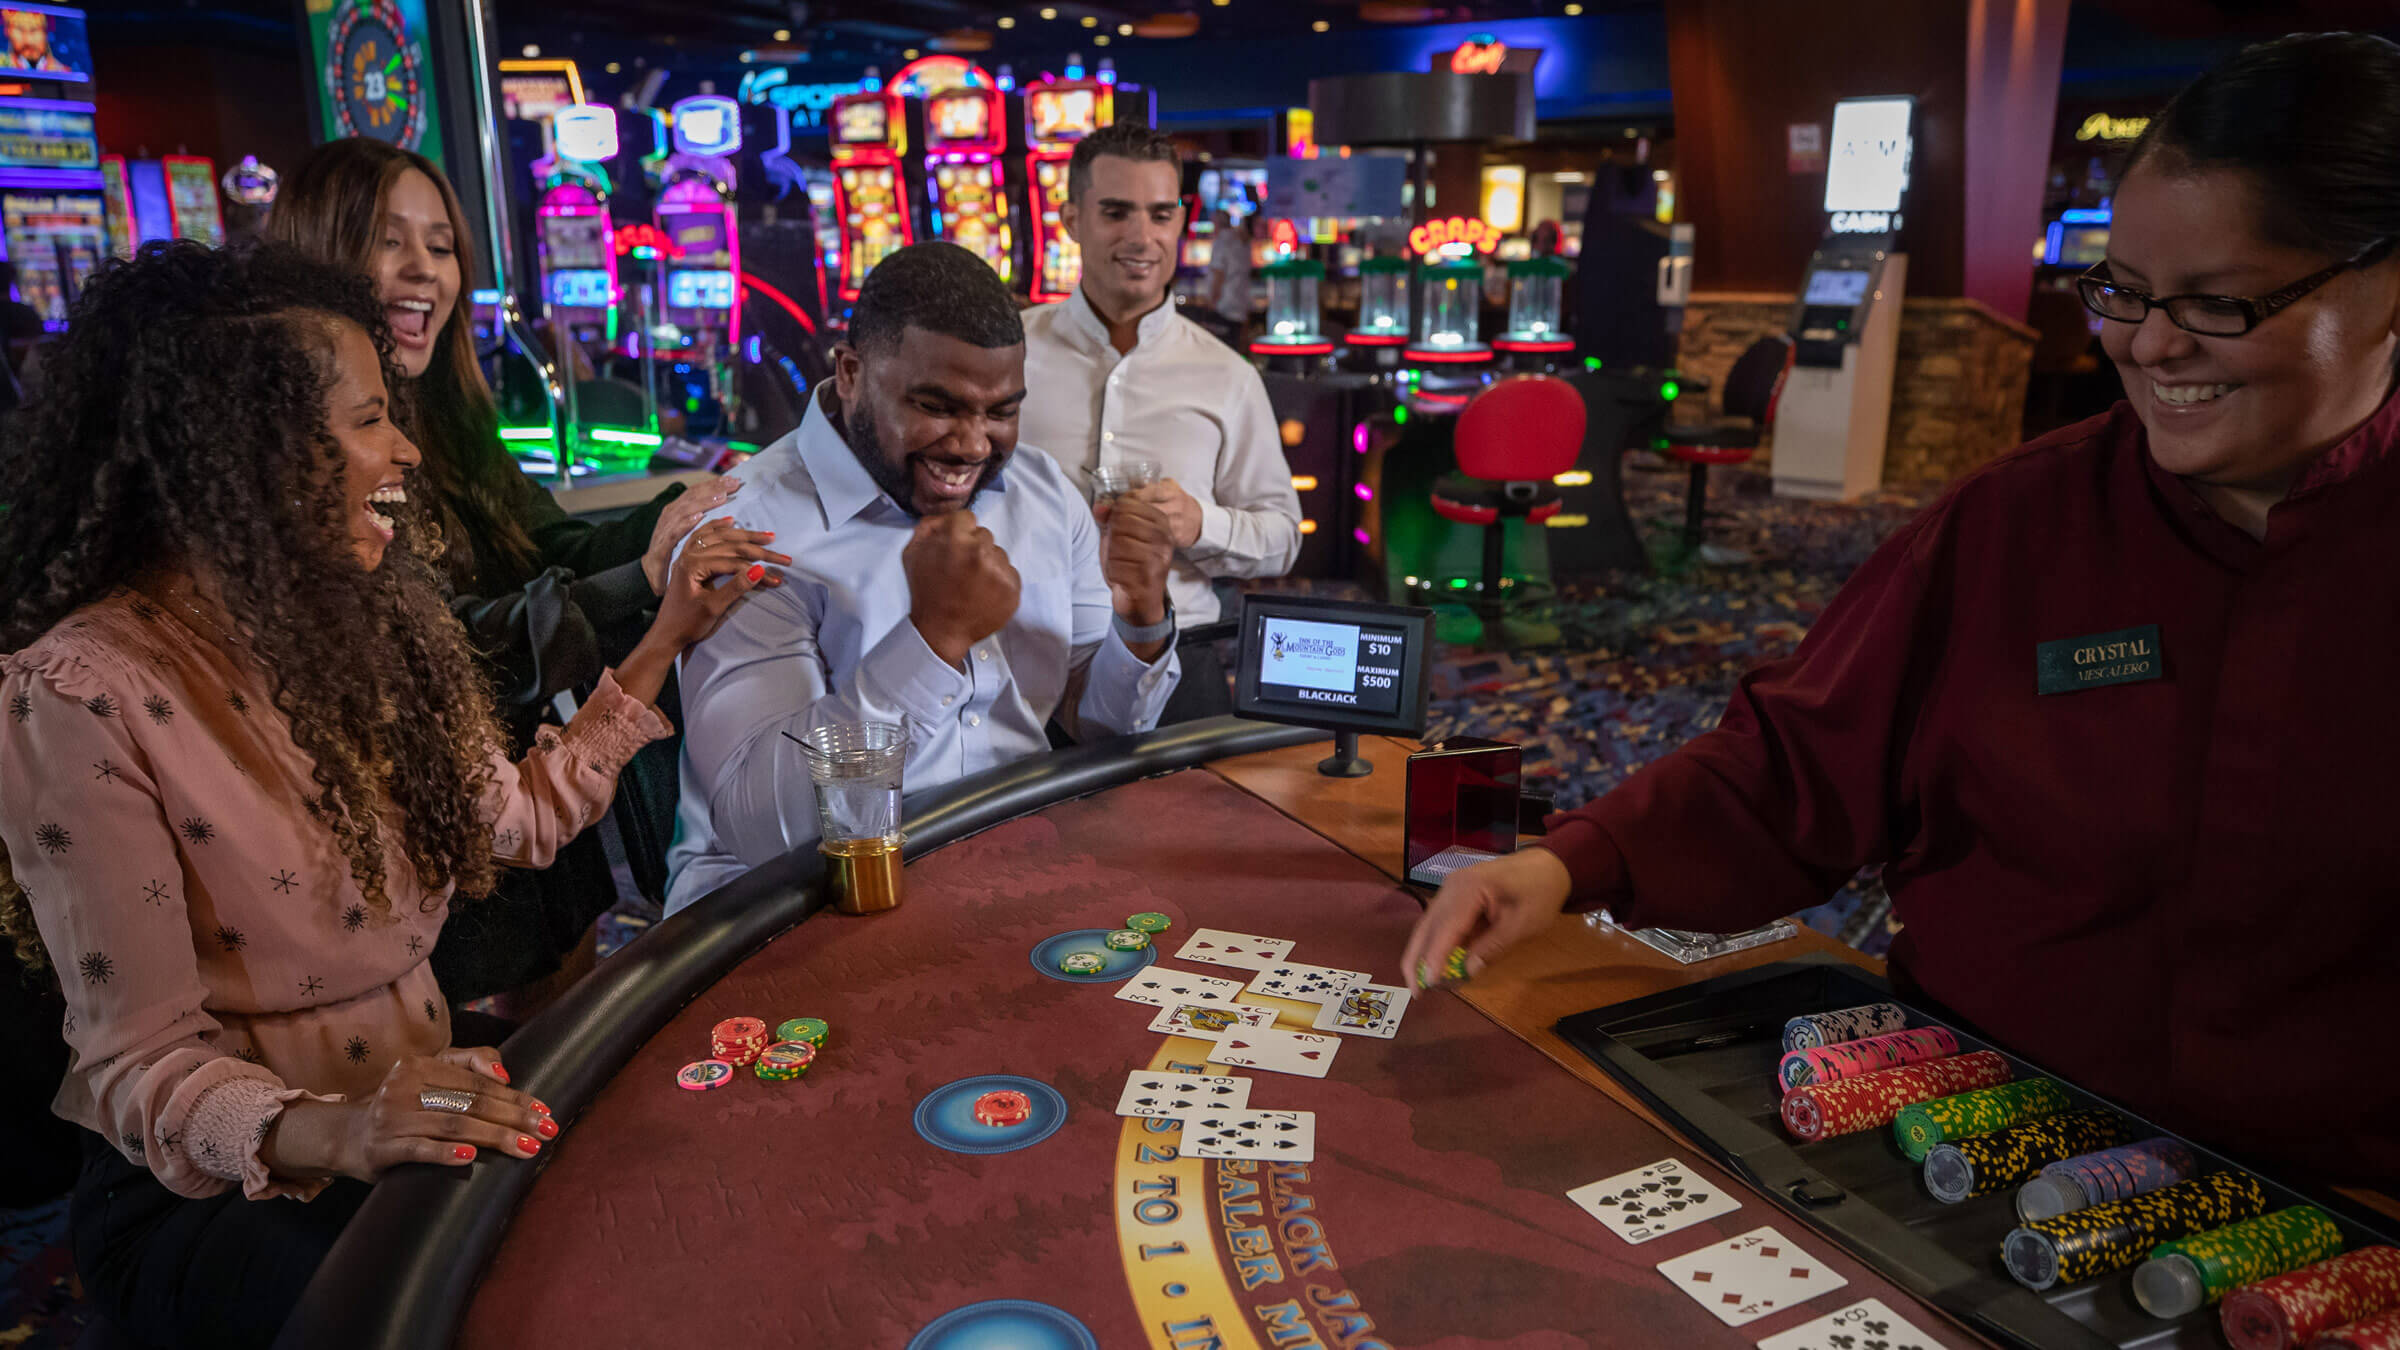 People playing blackjack at the Inn of the Mountain Gods Casino.